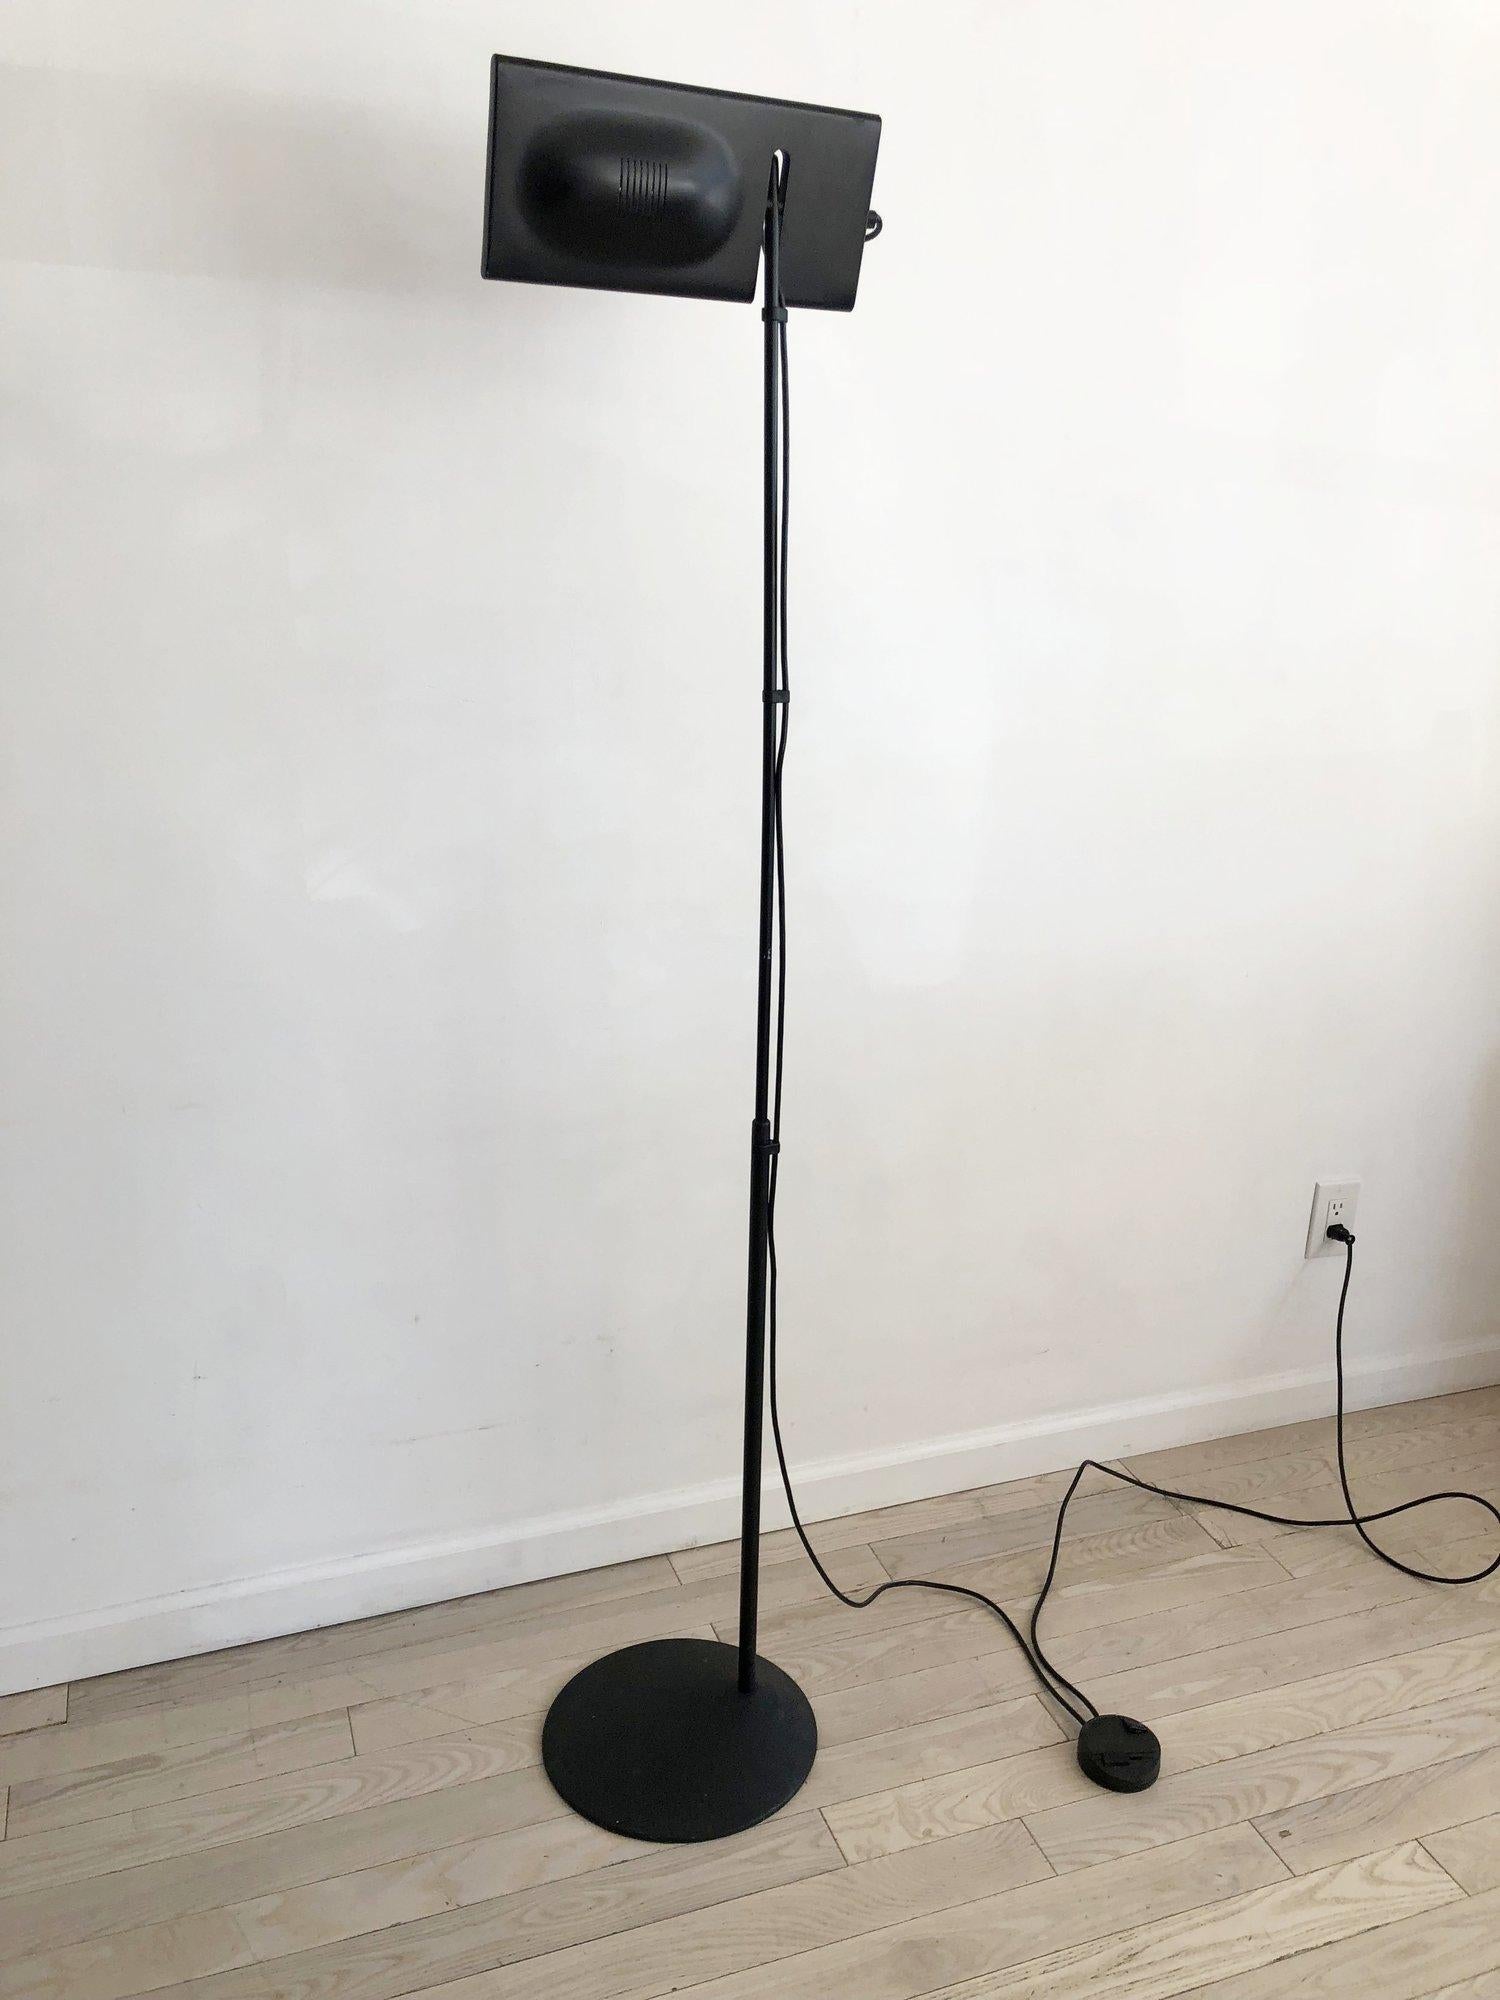 Italian 1980s Duna Terra Tall floor lamp by Mario Barbaglia and Marco Colombo for PAF Studios. Lamp adjusts from 52” to 77” tall. Swivel head to change light direction. Made in Italy. Foot pedal dimmer switch. Halogen bulb, easy to replace and lasts